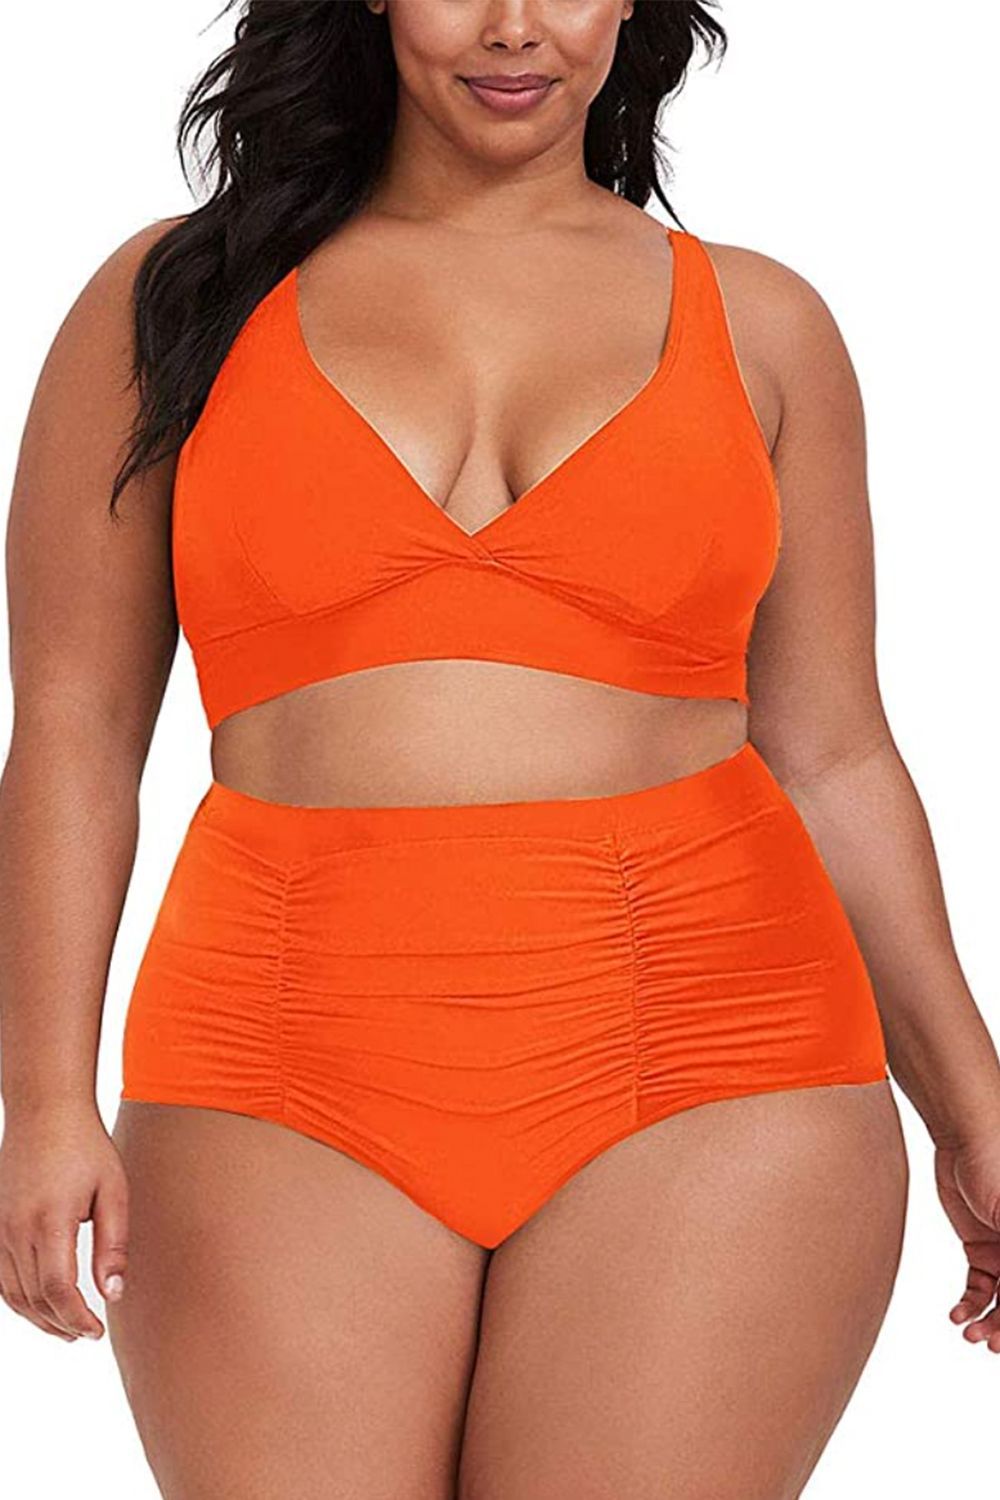 SELONE Plus Size Swimsuit for Women One Piece Monokini High Waisted Romper  Tummy Control Swimsuits Plus Size Bathing Suit for Women Bathing Suit for  Women Tummy Control Womens Bathing Suits White L 